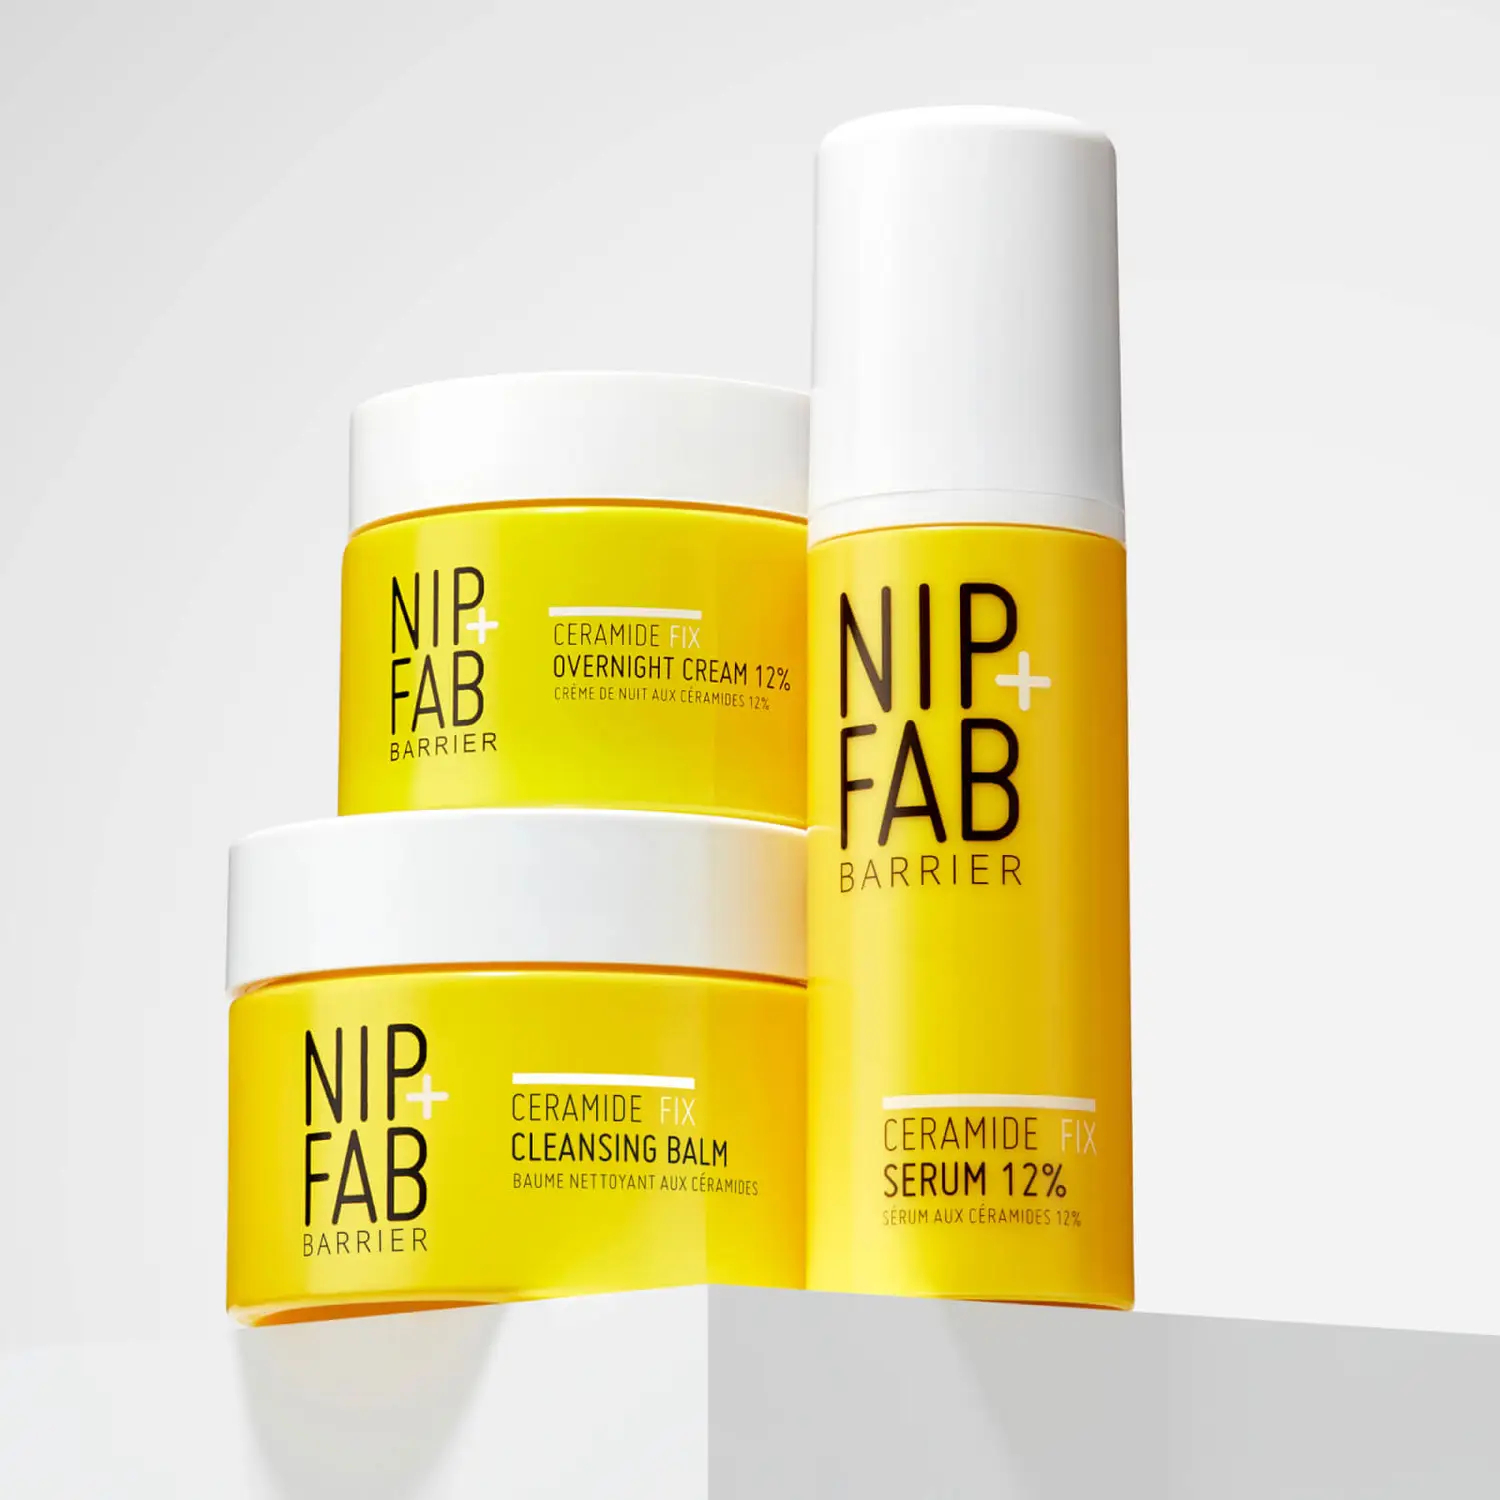 New launches from NIP+FAB